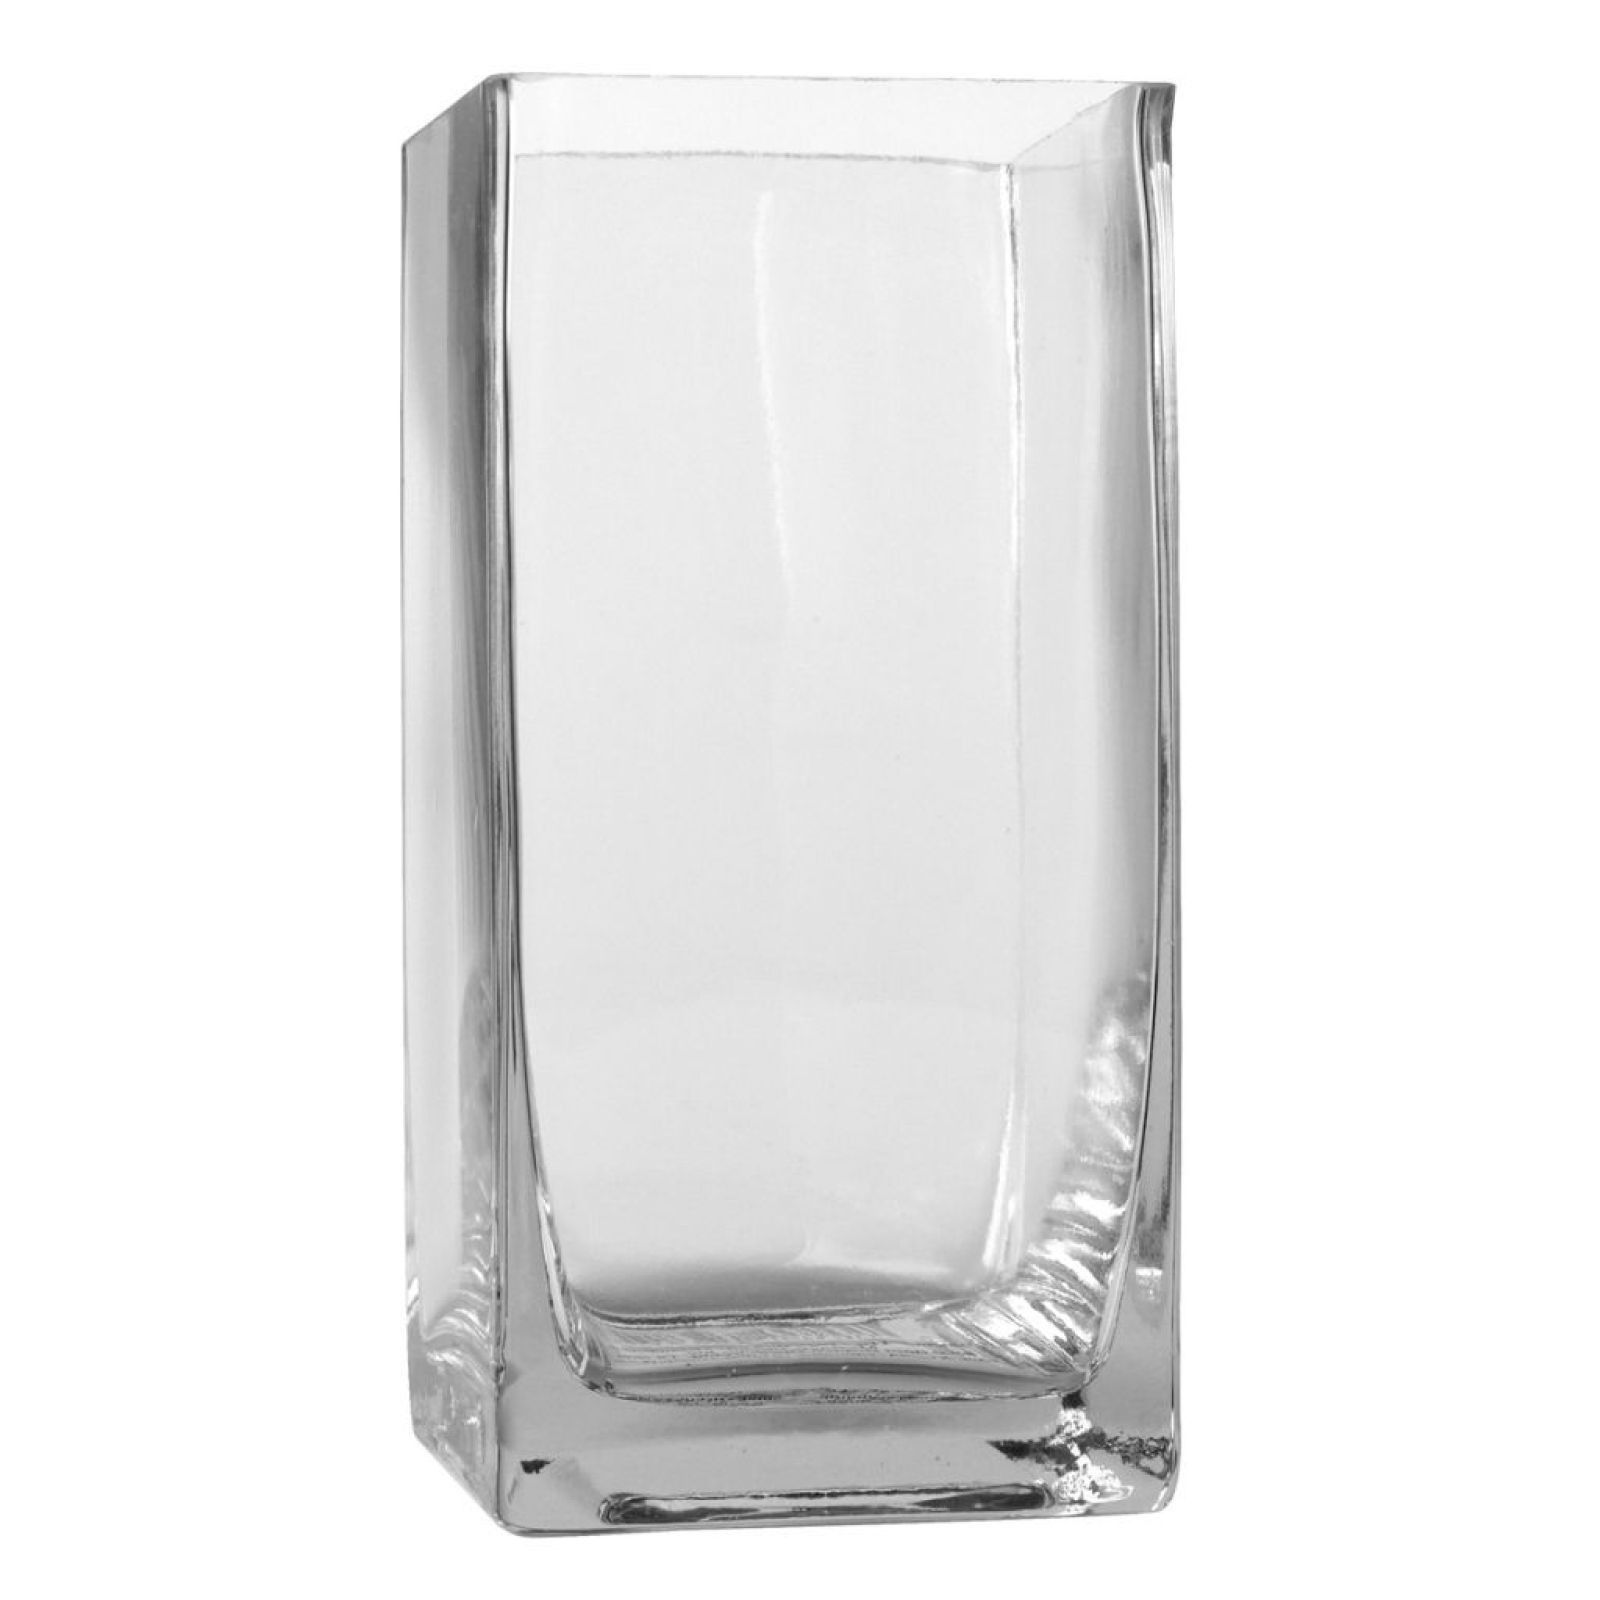 19 Best 5 Inch Square Glass Vases 2024 free download 5 inch square glass vases of ashland tall cube glass vase cube and glass intended for ashlanda tall cube glass vase 6